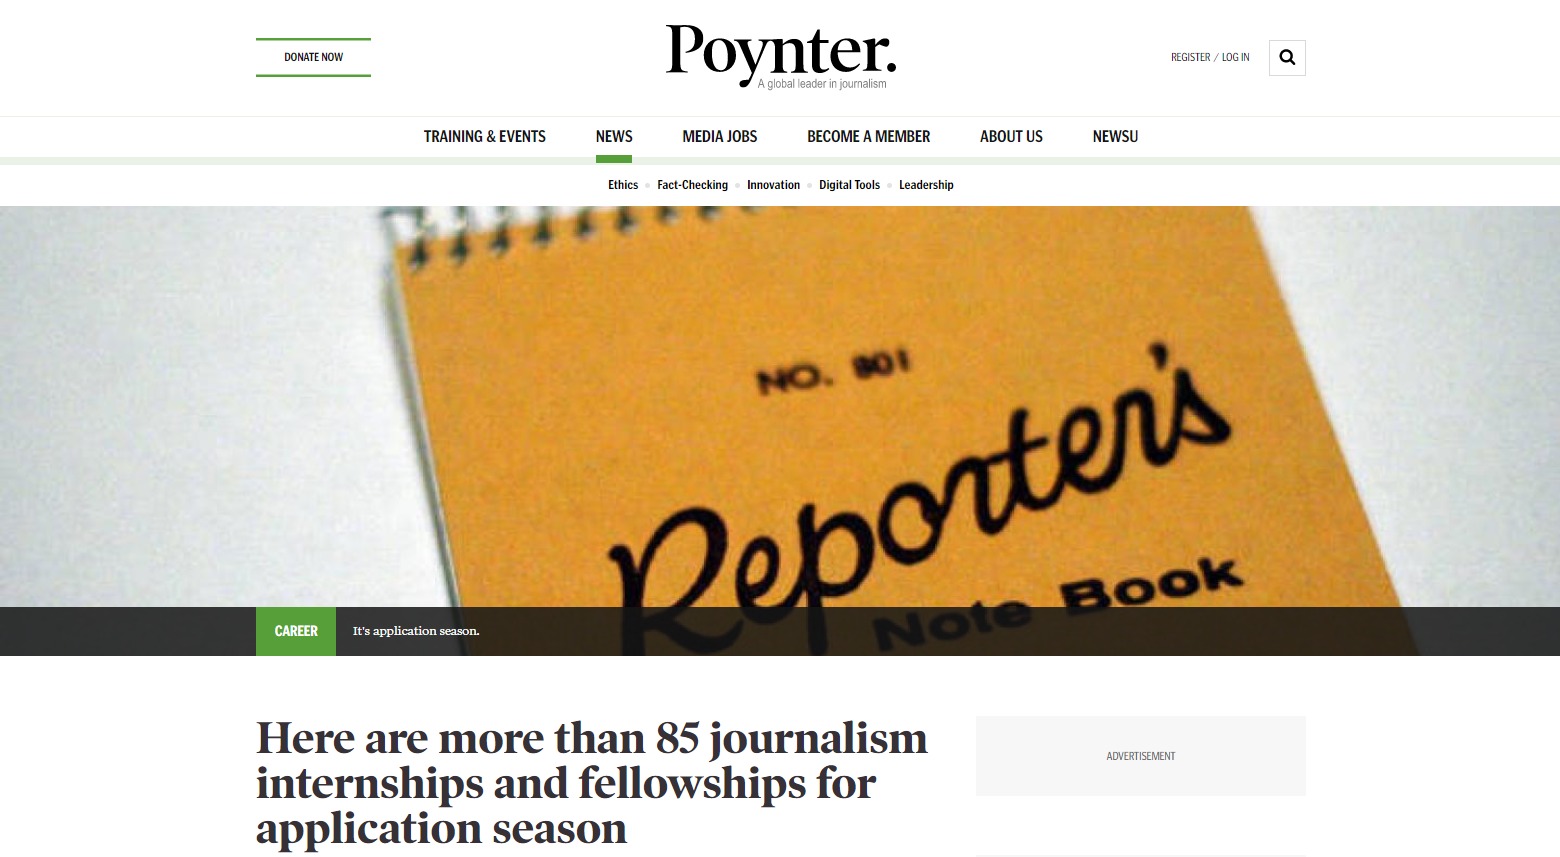 Here are more than 85 journalism internships and fellowships for application season Poynter